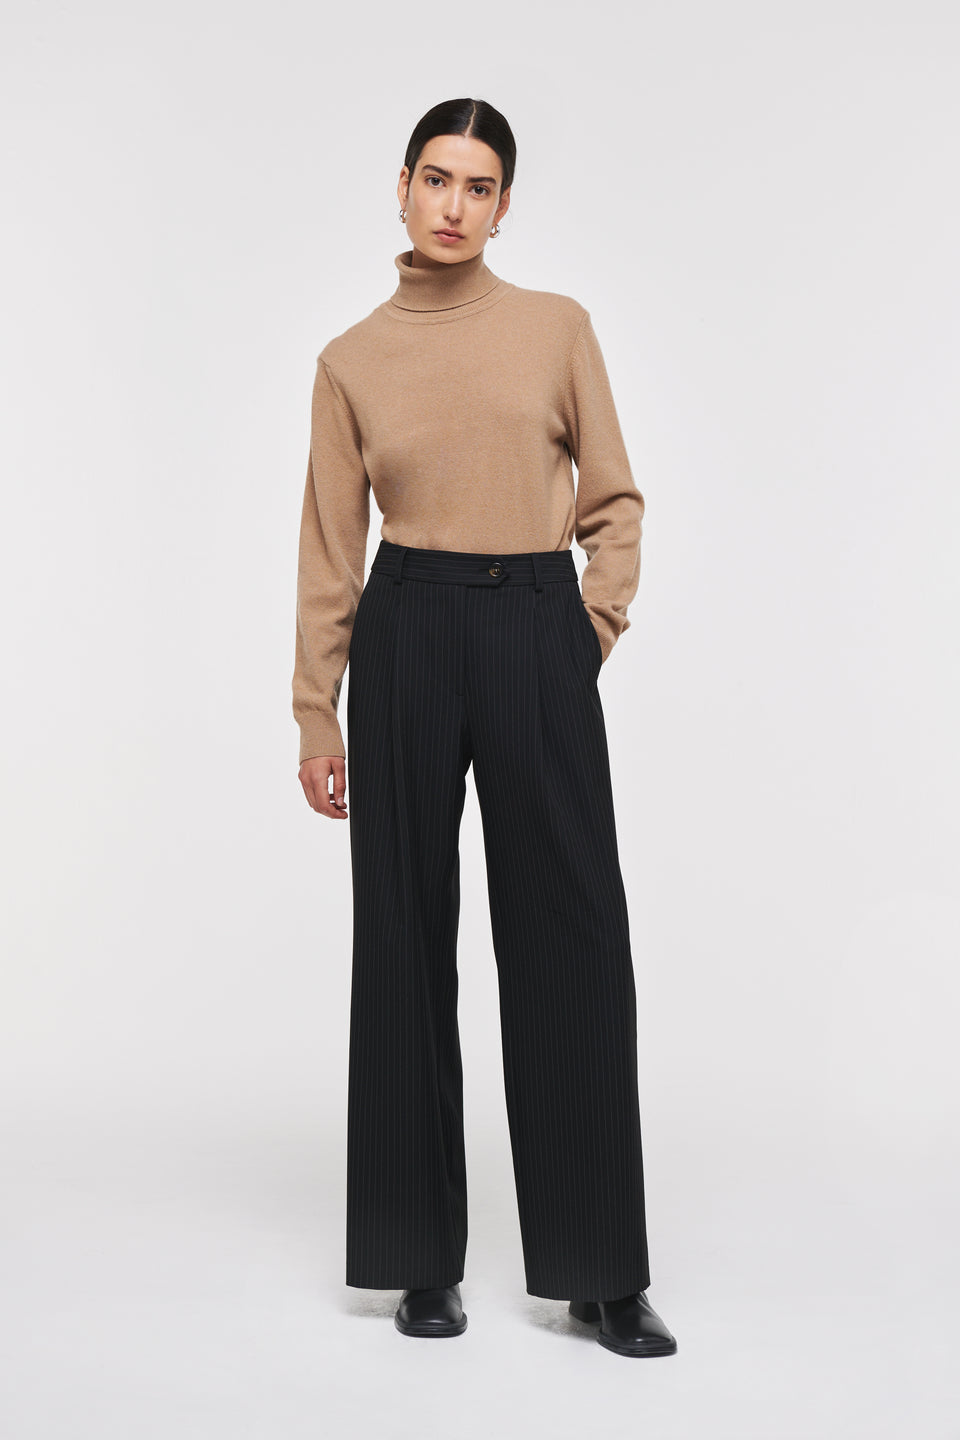 A pair of wide leg tailored trousers are a staple in any wardrobe. Shaped for a fluid silhouette, the design features a mid-rise waist, extended tab waistband and a beautiful black pinstripe pattern. Pair with the matching KIM waistcoat for a statement look.